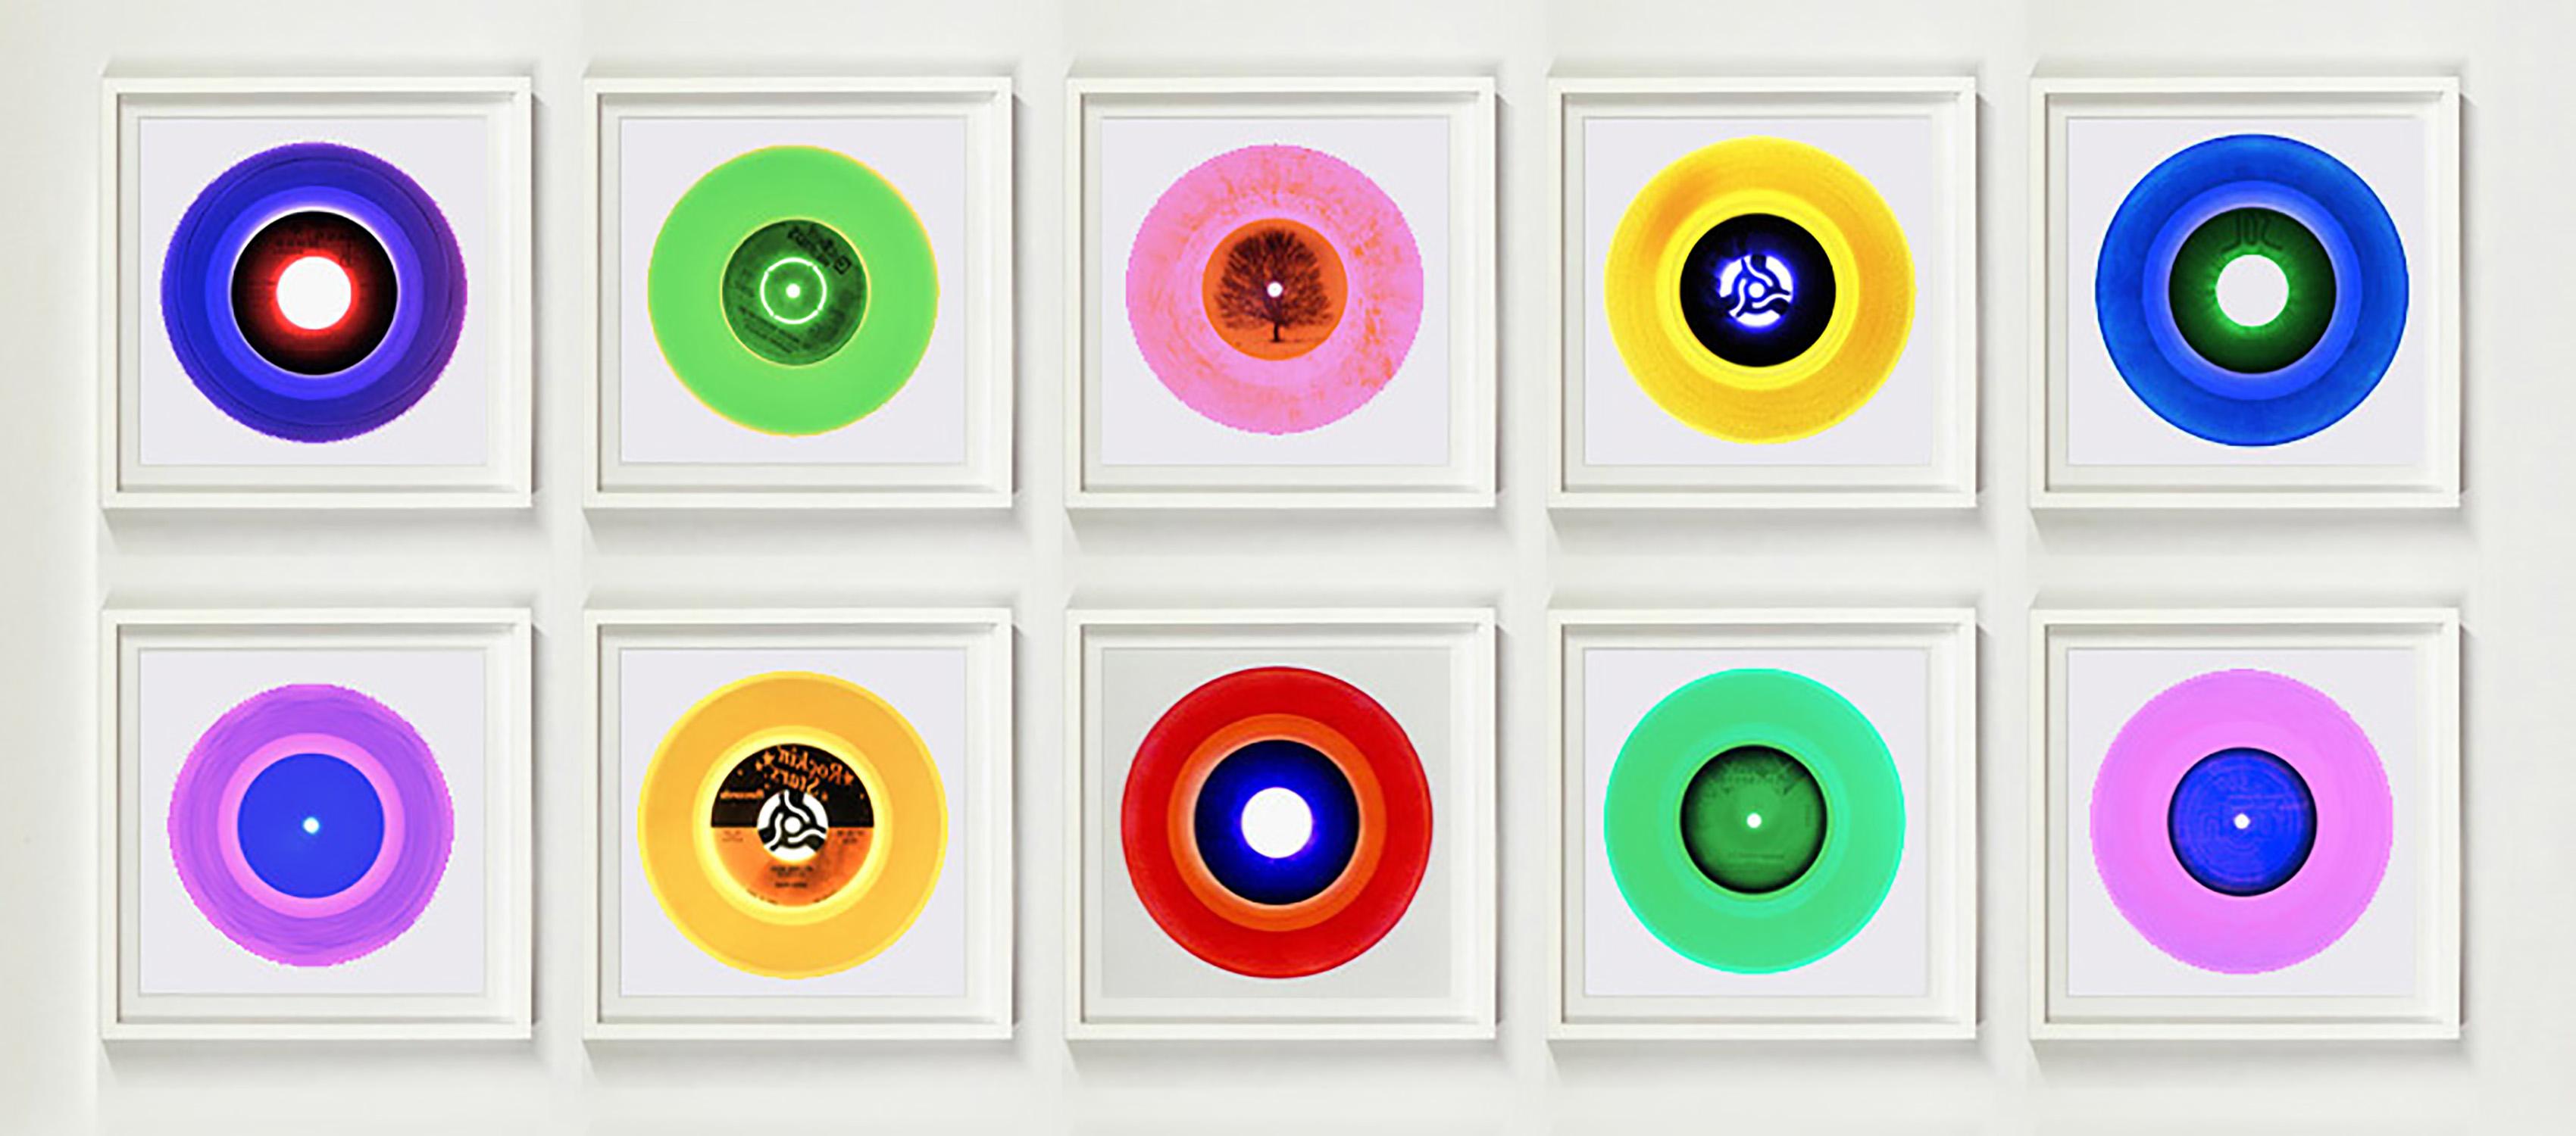 Heidler & Heeps Vinyl Collection Ten Piece B Side Installation.
Acclaimed contemporary photographers, Richard Heeps and Natasha Heidler have collaborated to make this beautifully mesmerising collection. A celebration of the vinyl record and analogue